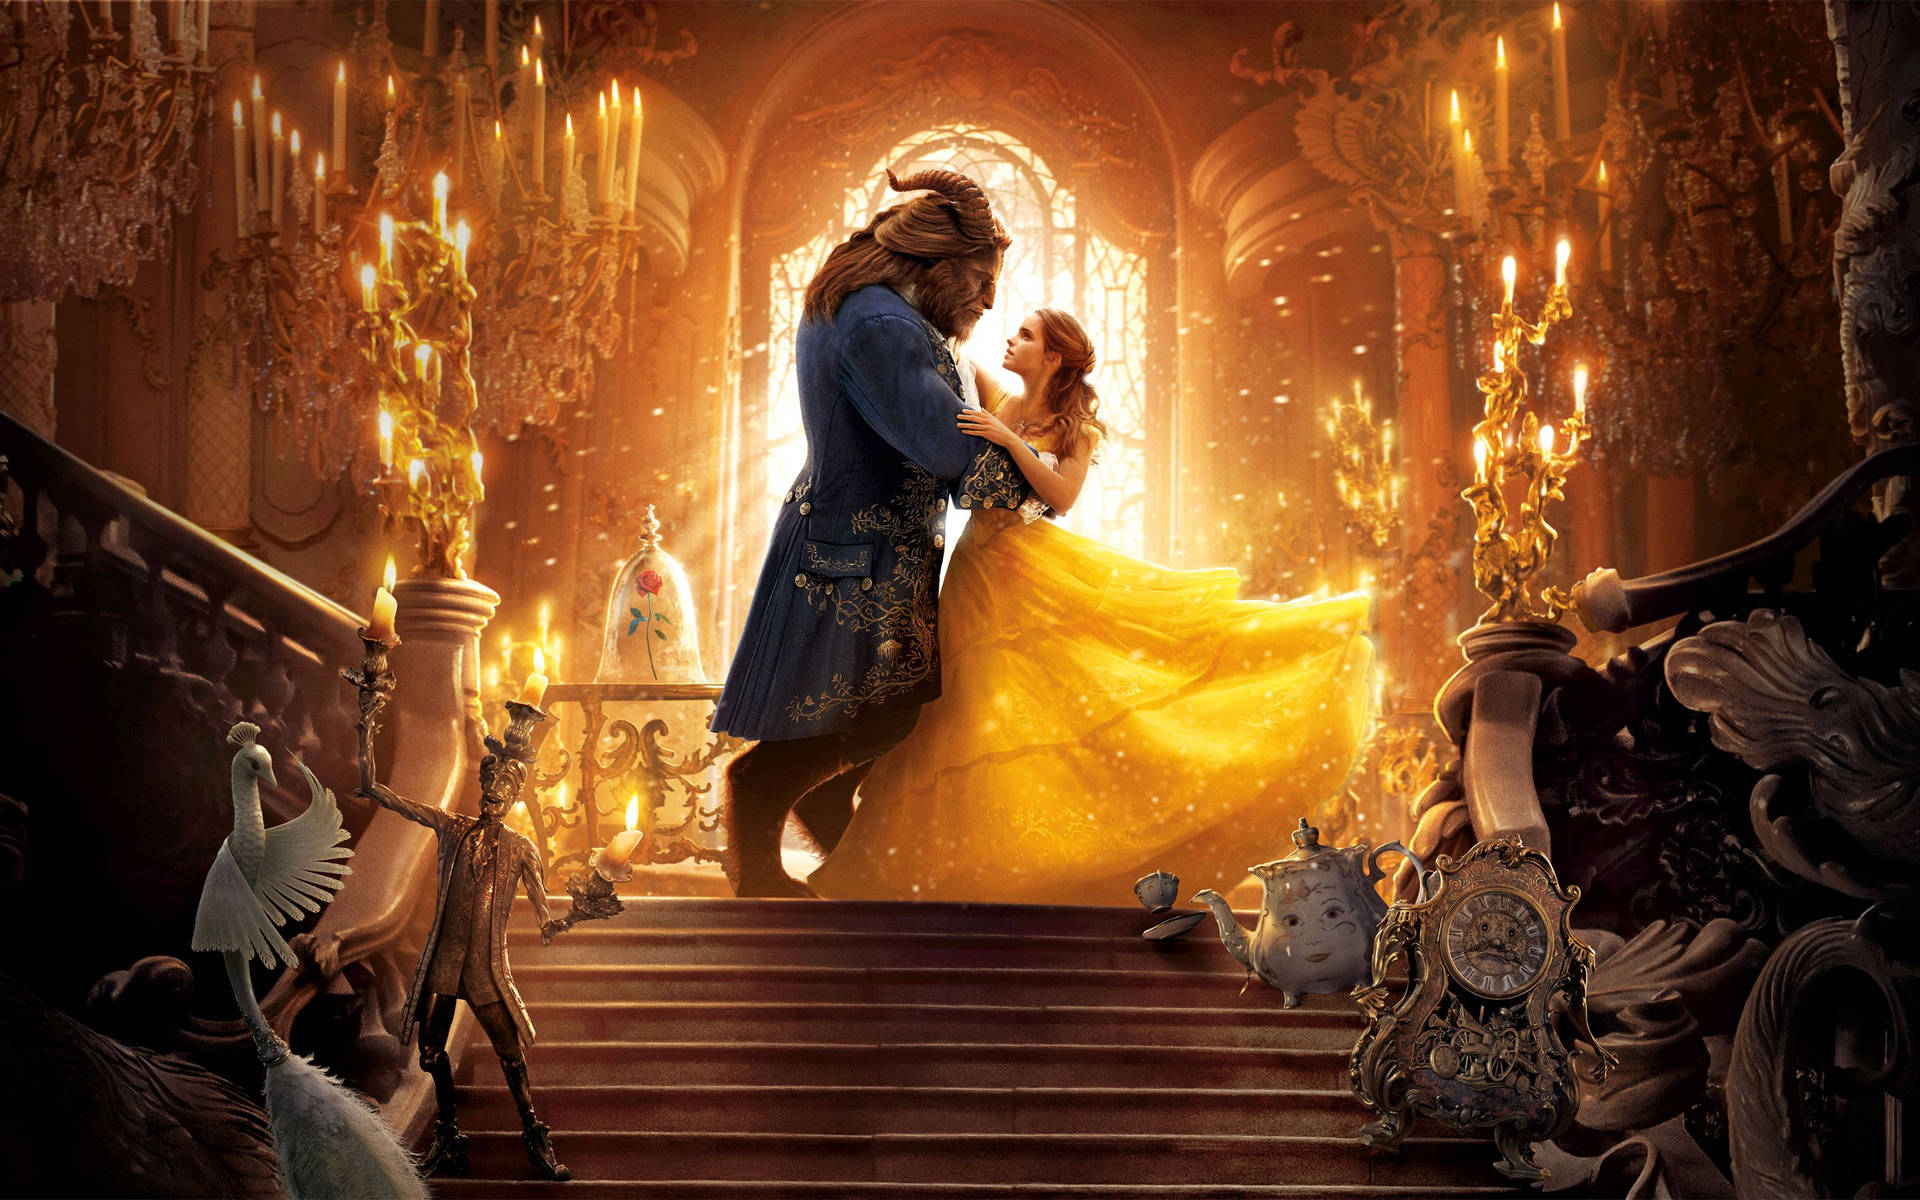 Free Beauty And The Beast Wallpaper Downloads, Beauty And The Beast Wallpaper for FREE